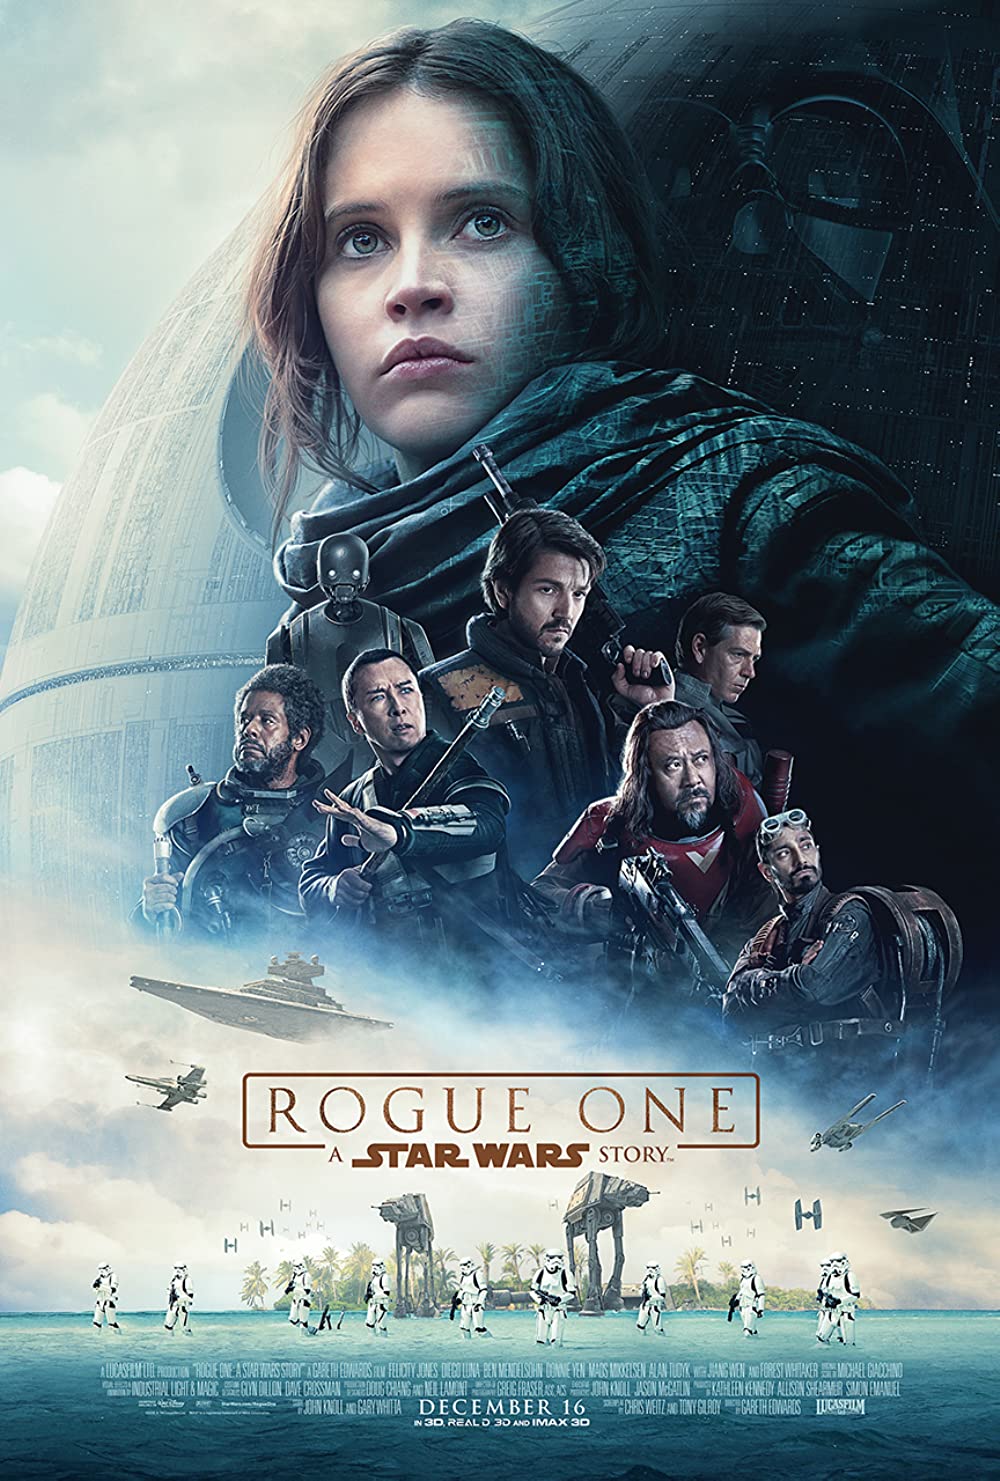 Rogue One: A Star Wars Story (partially found unreleased Gareth